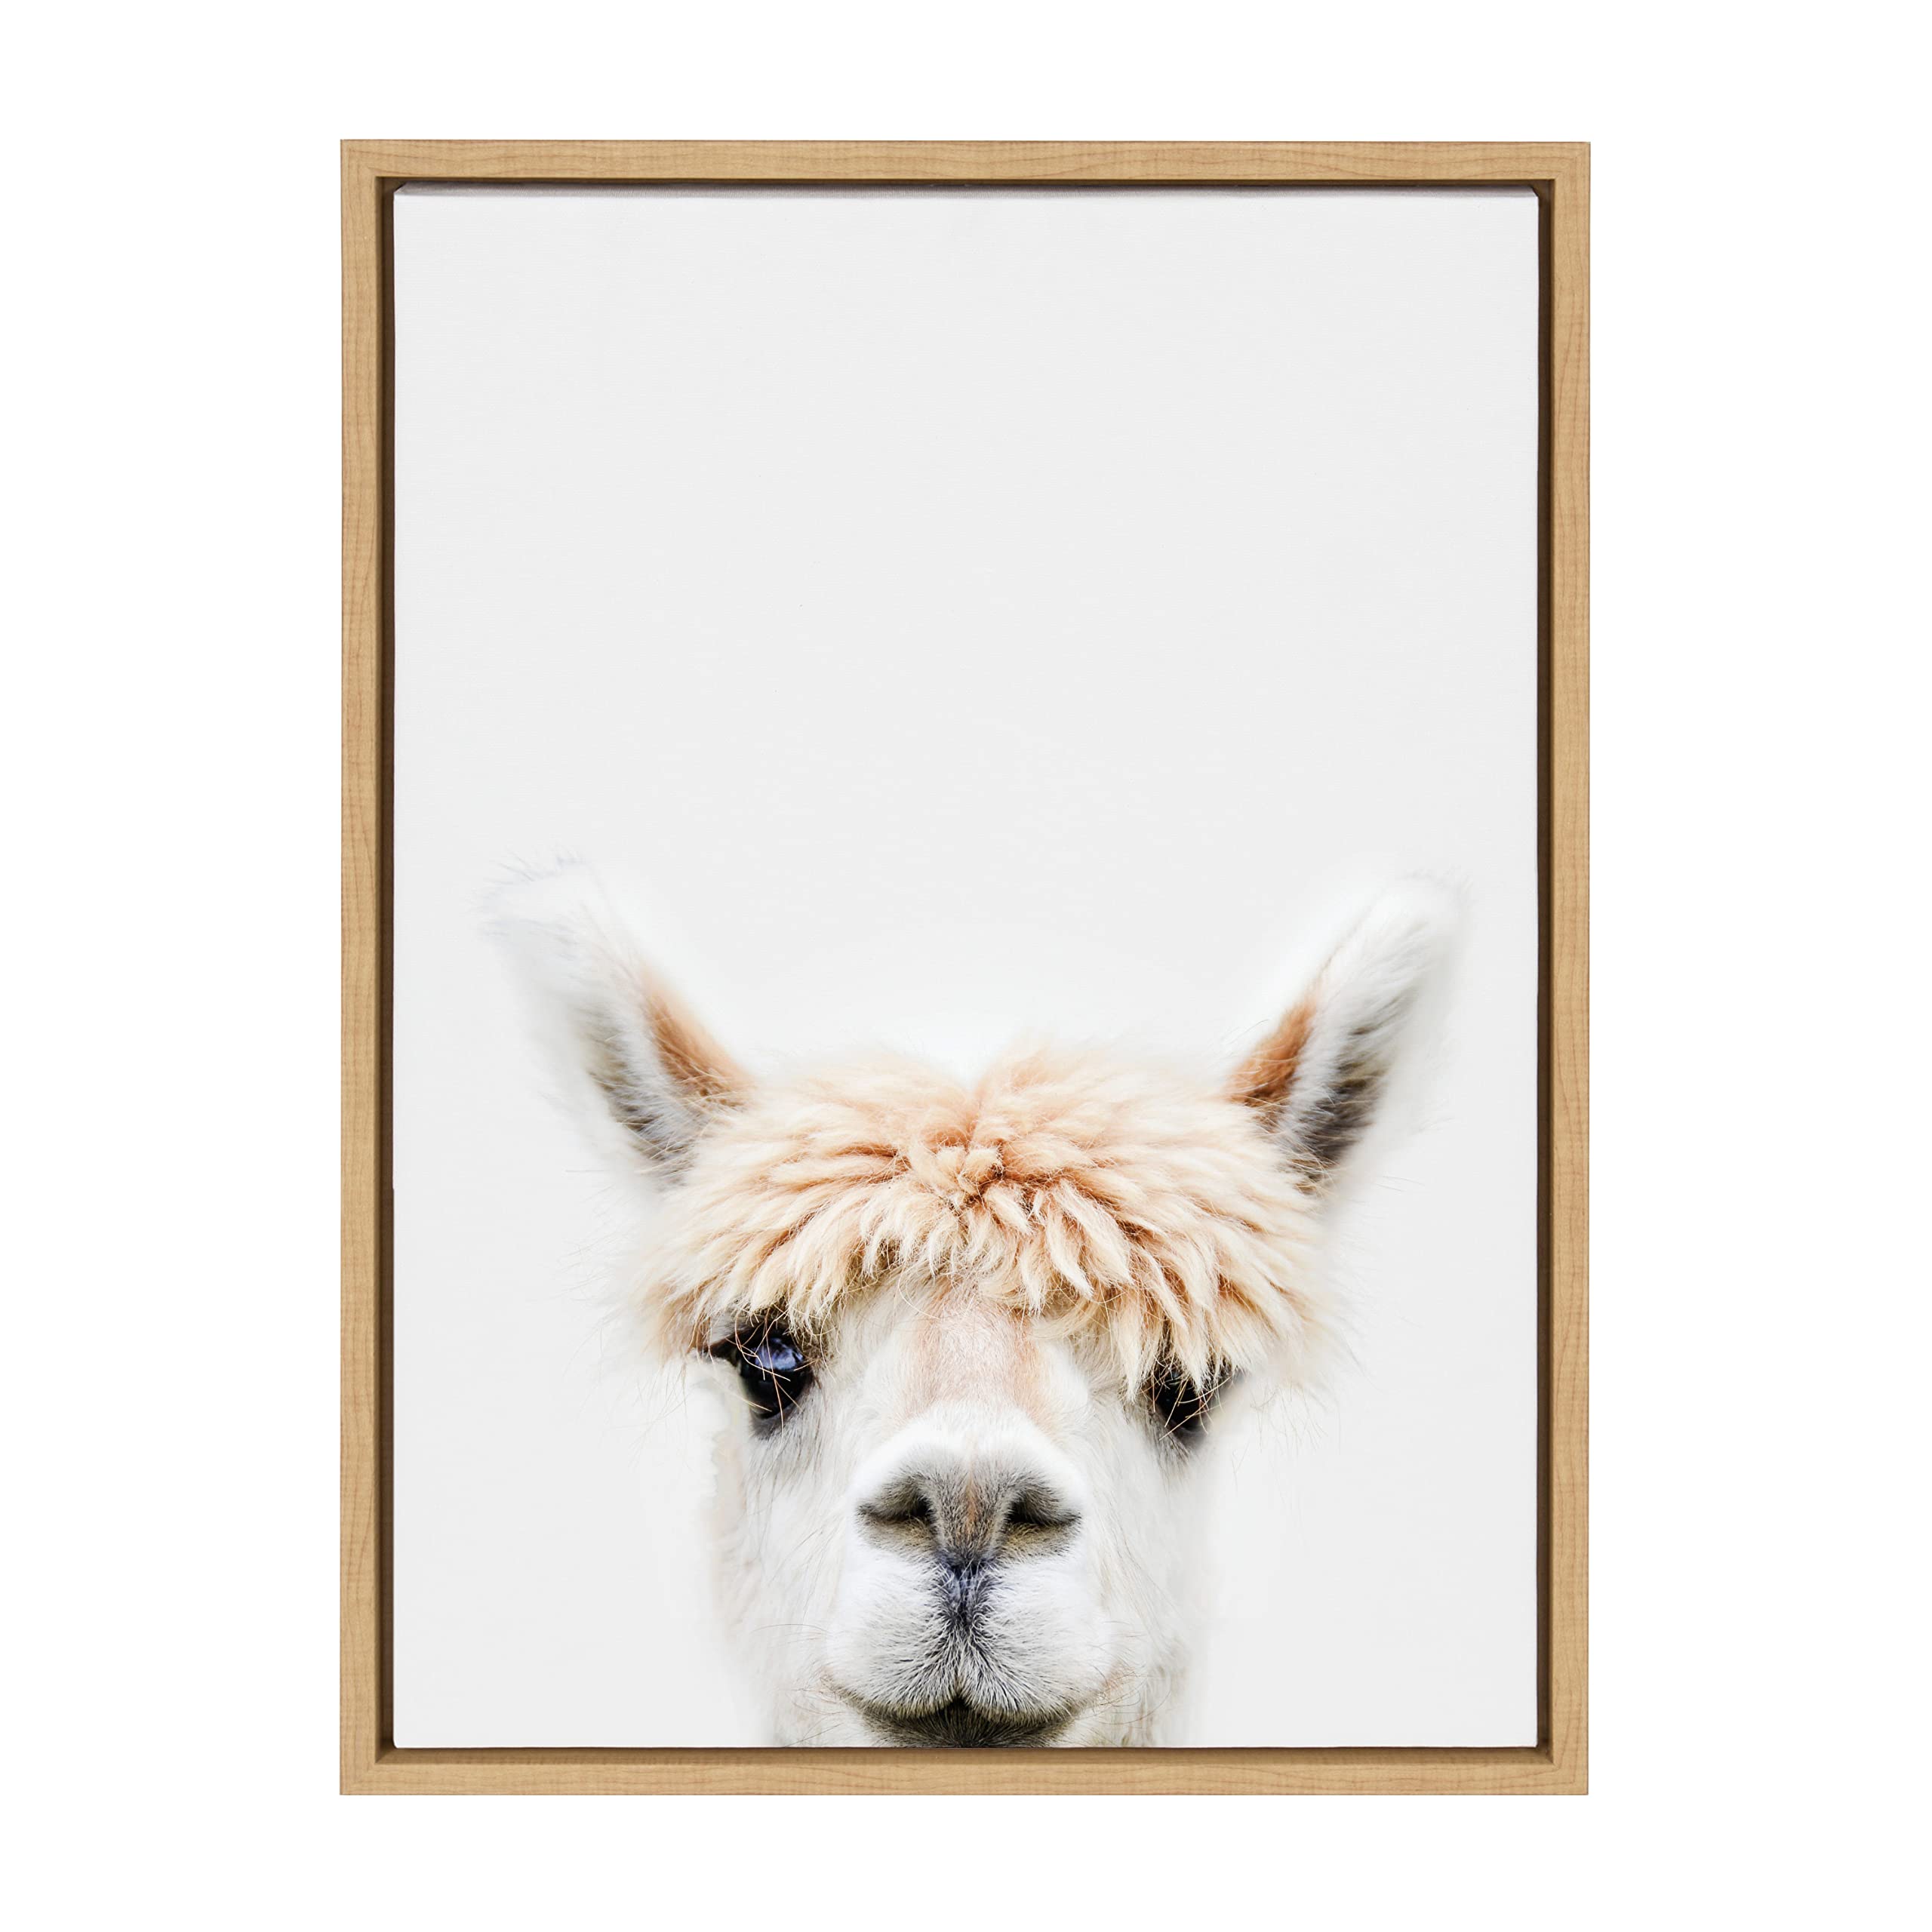 Kate and Laurel Sylvie Alpaca Bangs Framed Canvas Wall Art by Amy Peterson Art Studio, 18x24 Natural, Decorative Adorable Animal Art for Wall